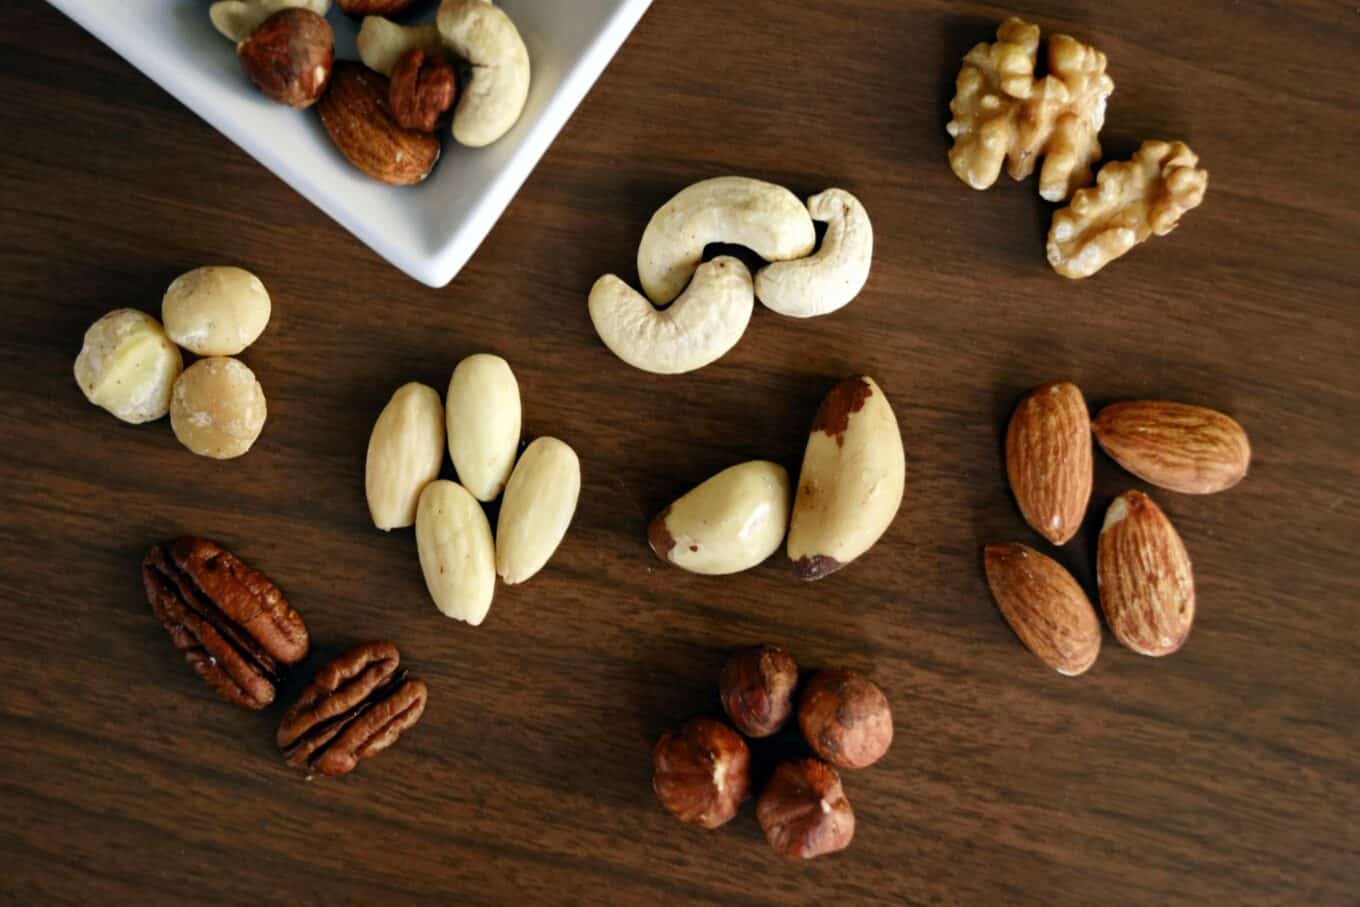 Best 50 Dry Fruits Name in English And Hindi with Image